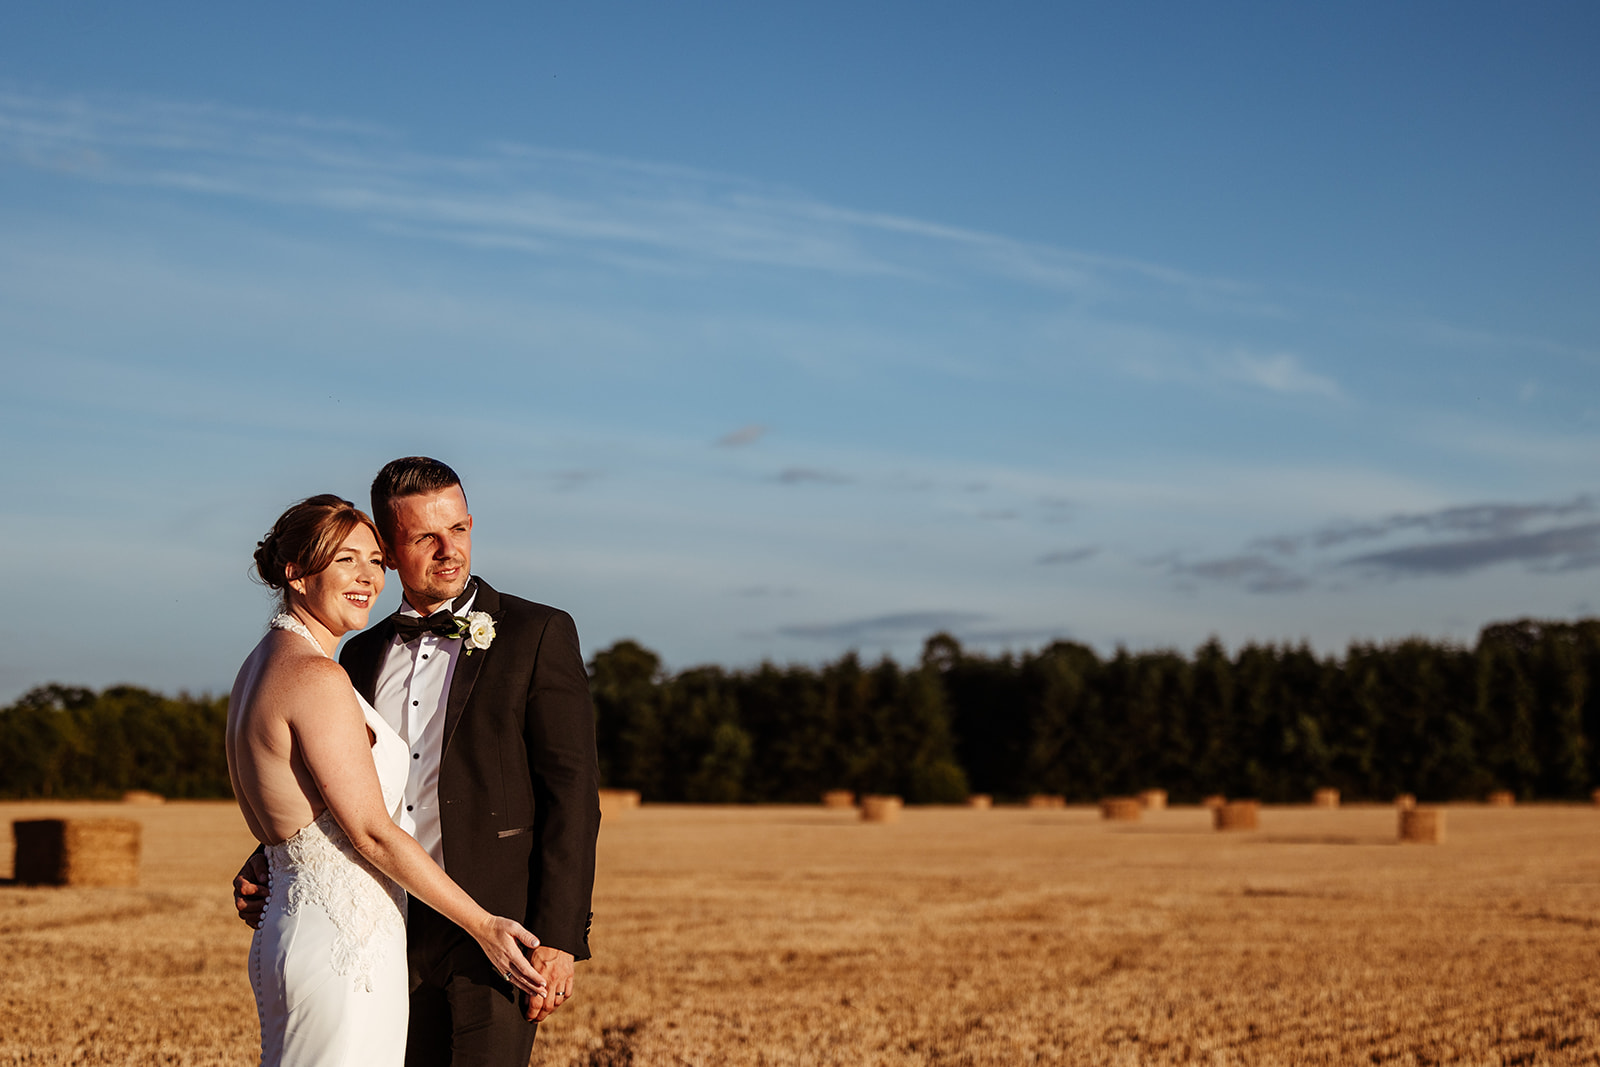 Couple watch the sunset in a field with trees and hay bales, holding hands 